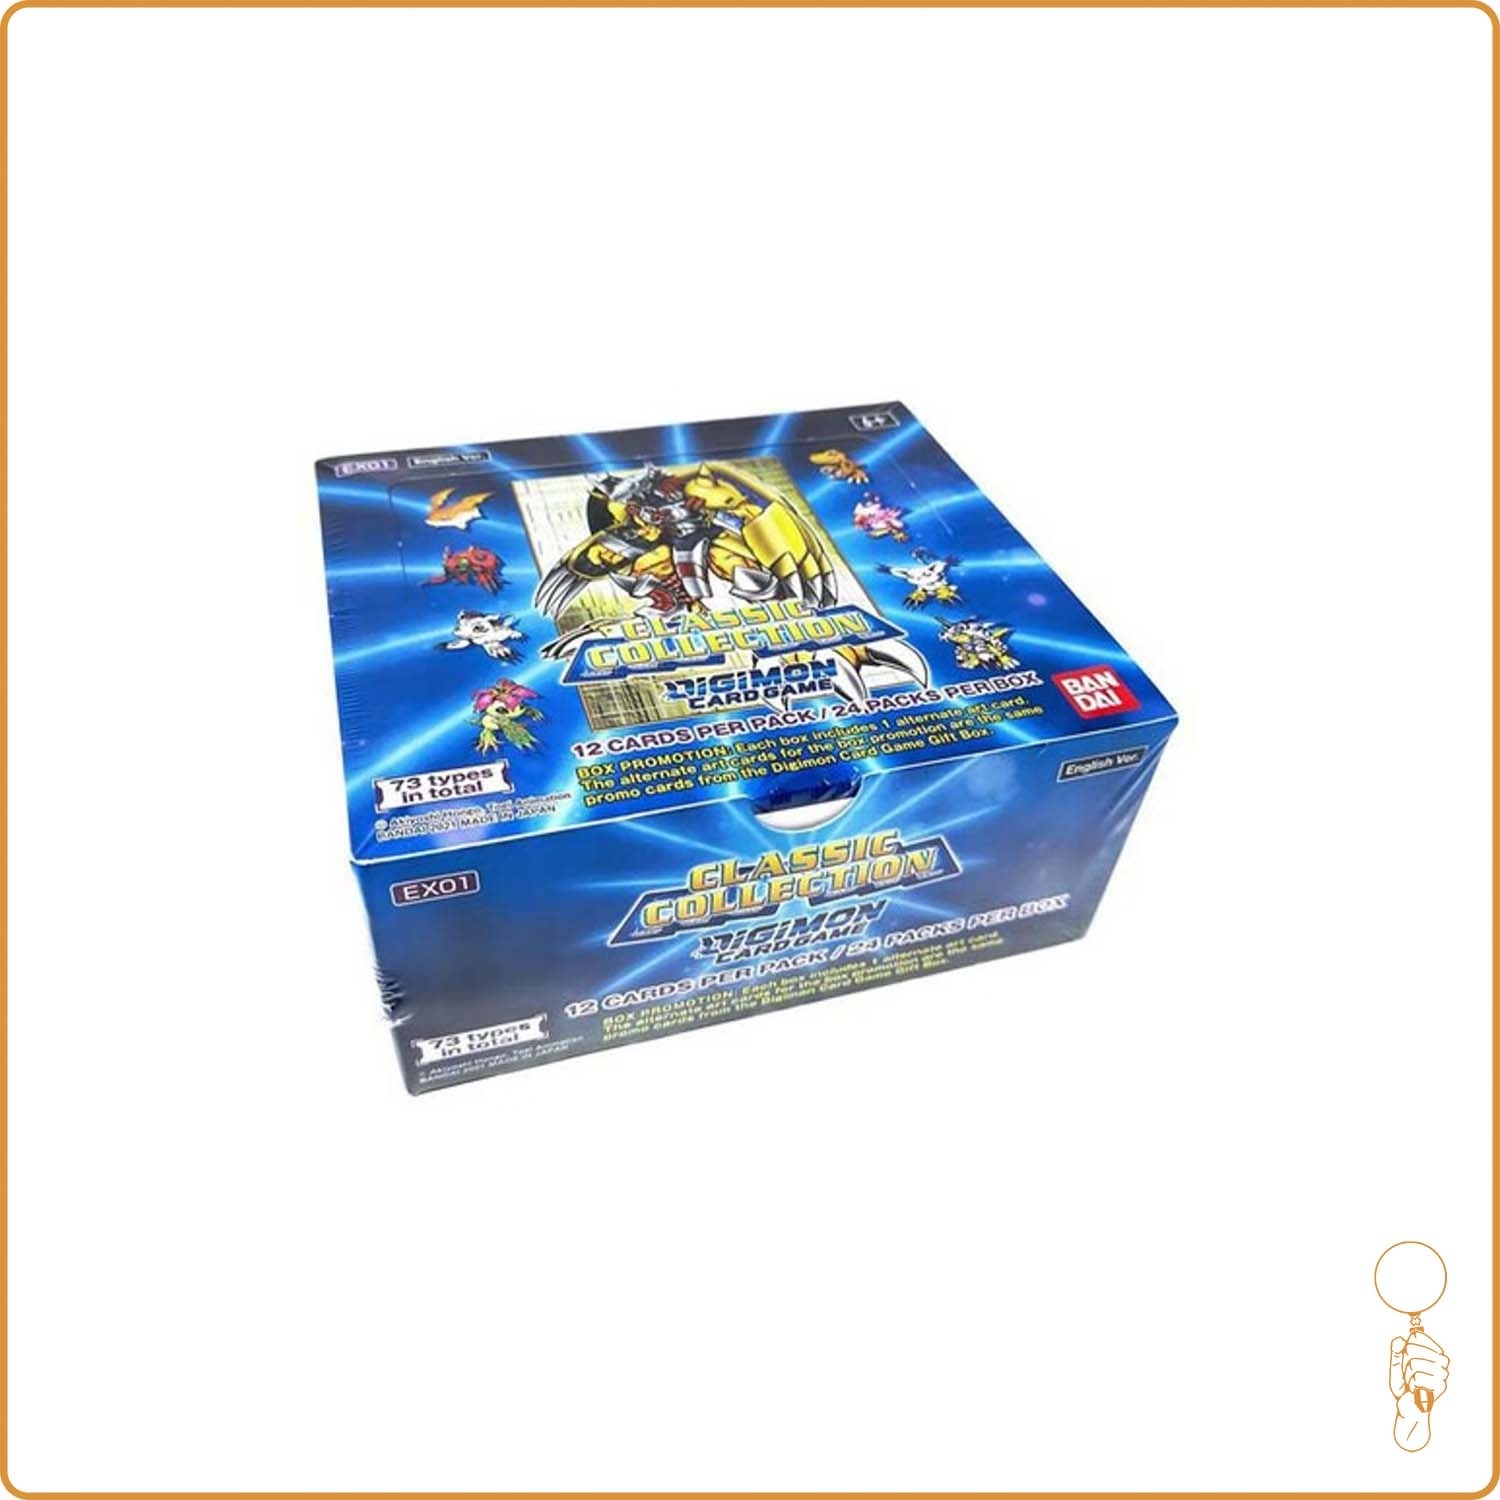 Display - Digimon Card Game - Classic Collection - EX01 - 24 Boosters - Scellé - Anglais Bandai - 1